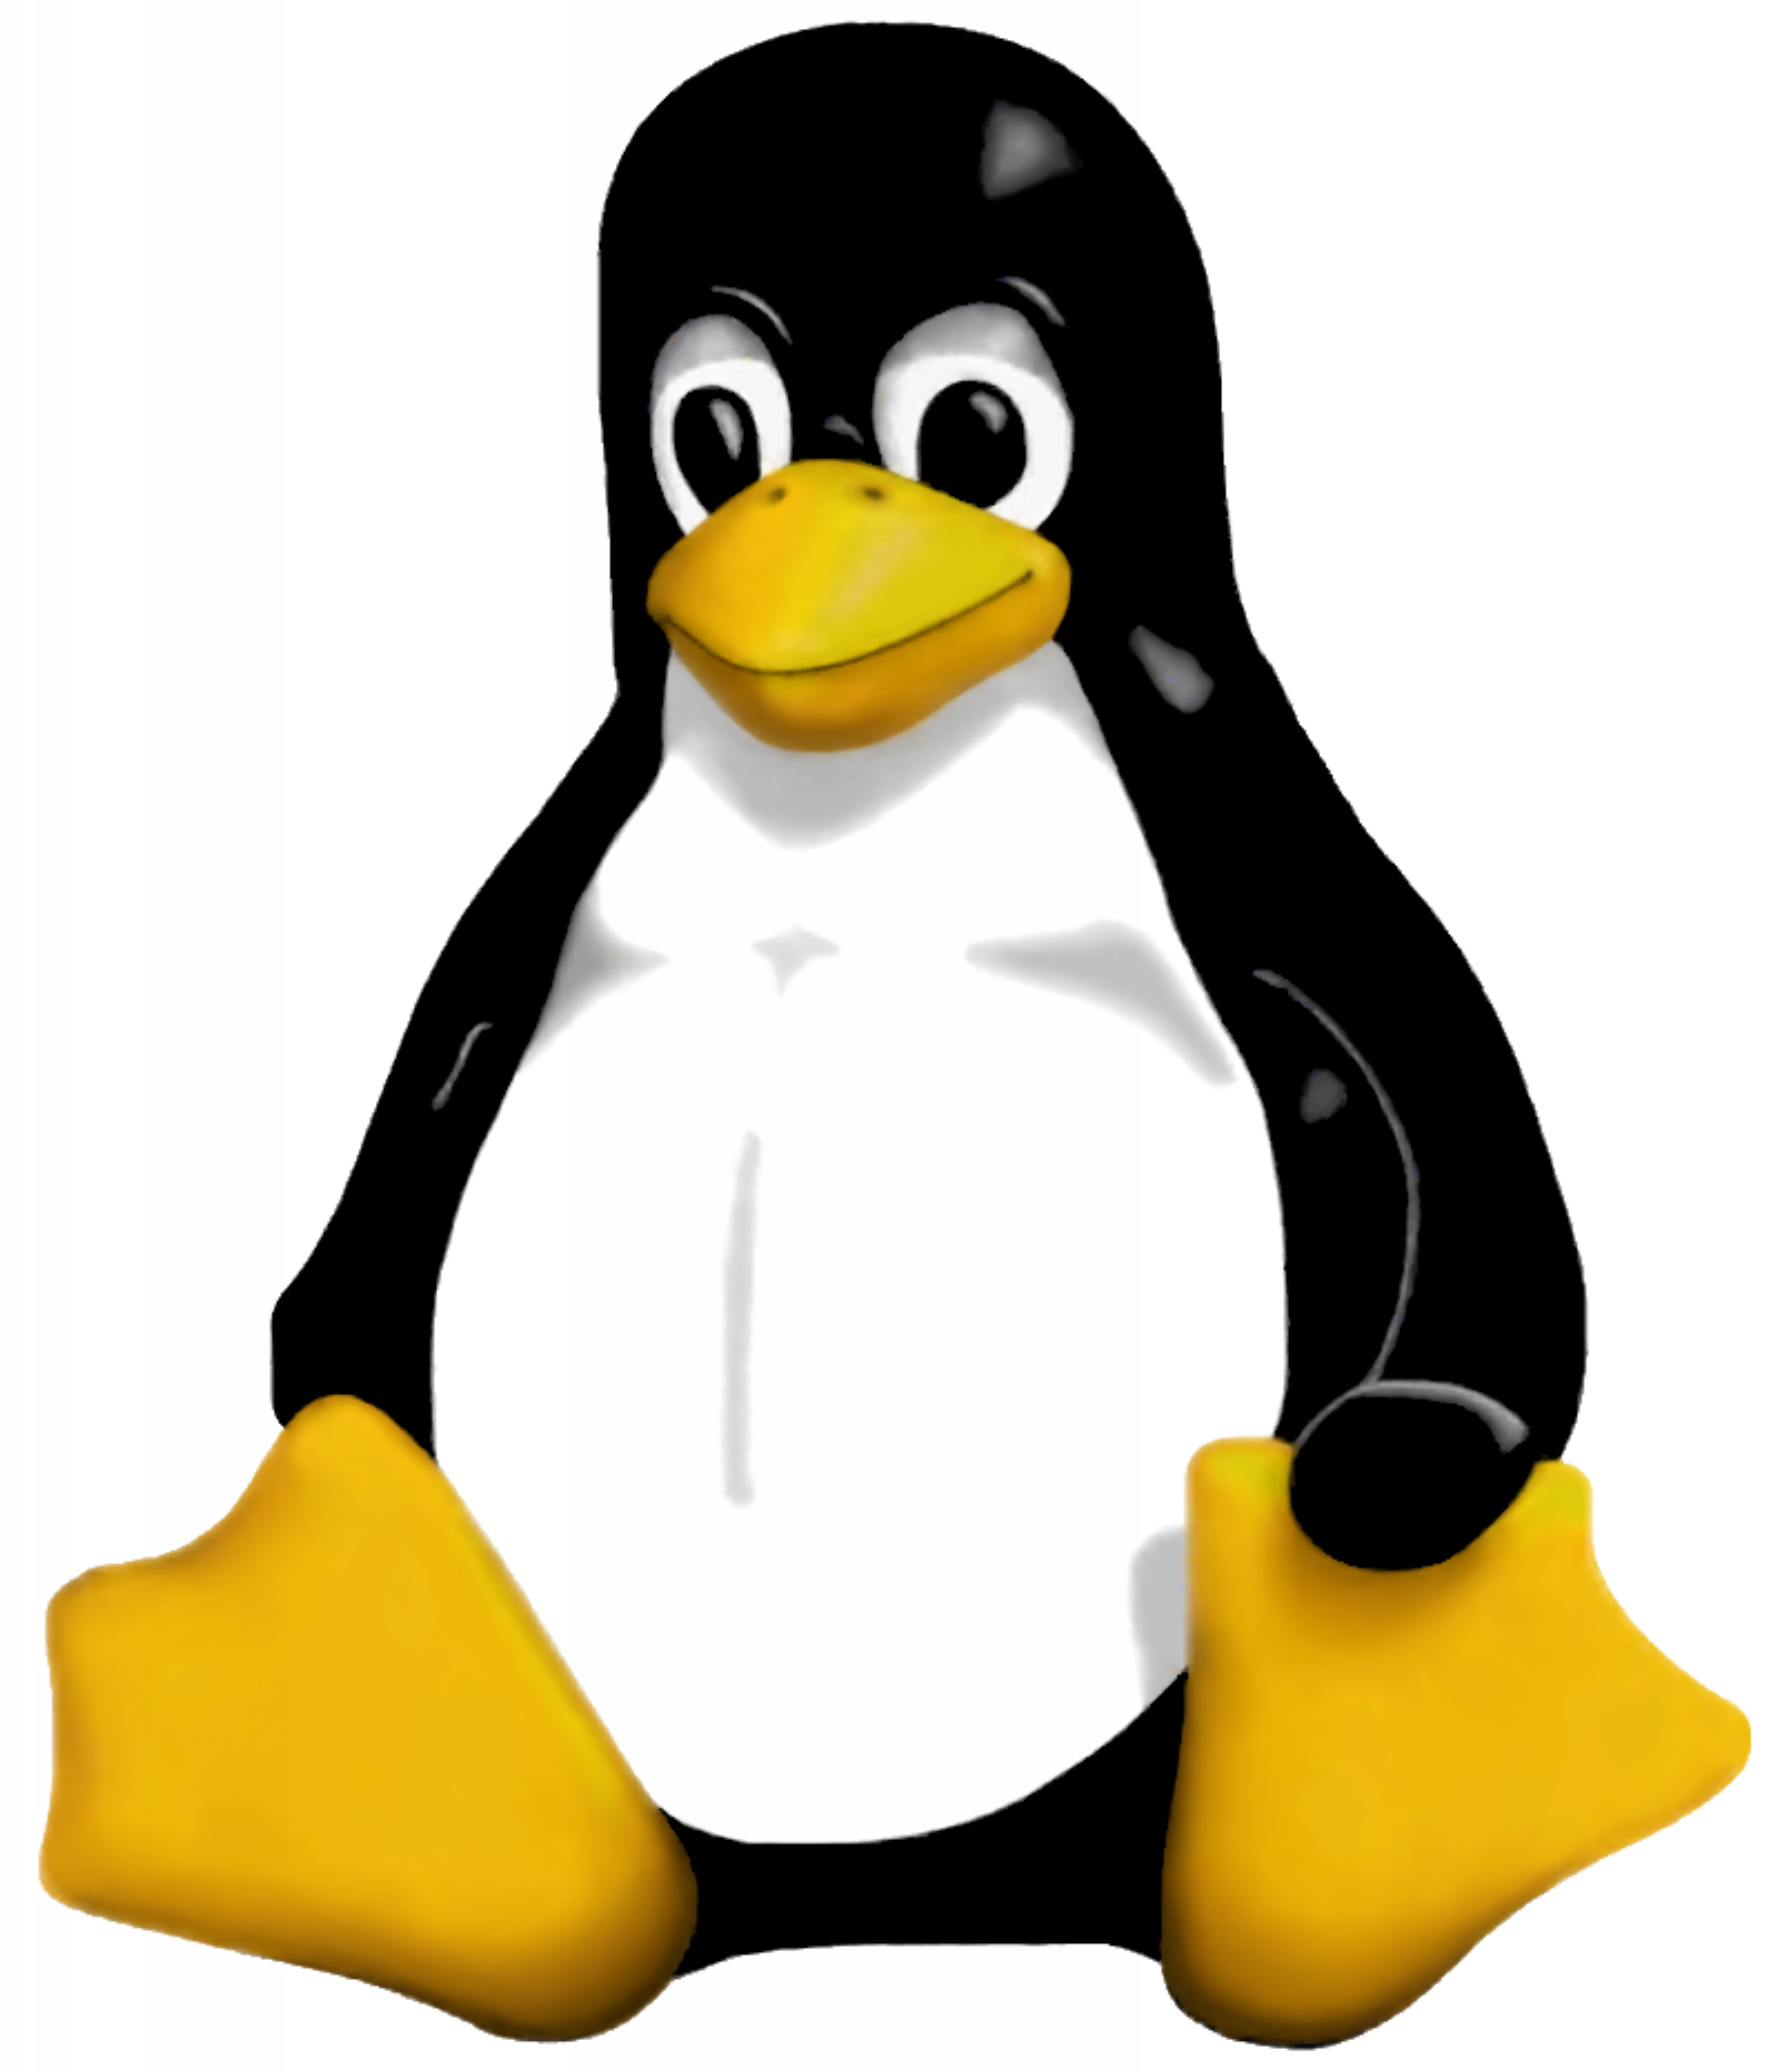 Linux: for geeks or normal humans? | BlankBored